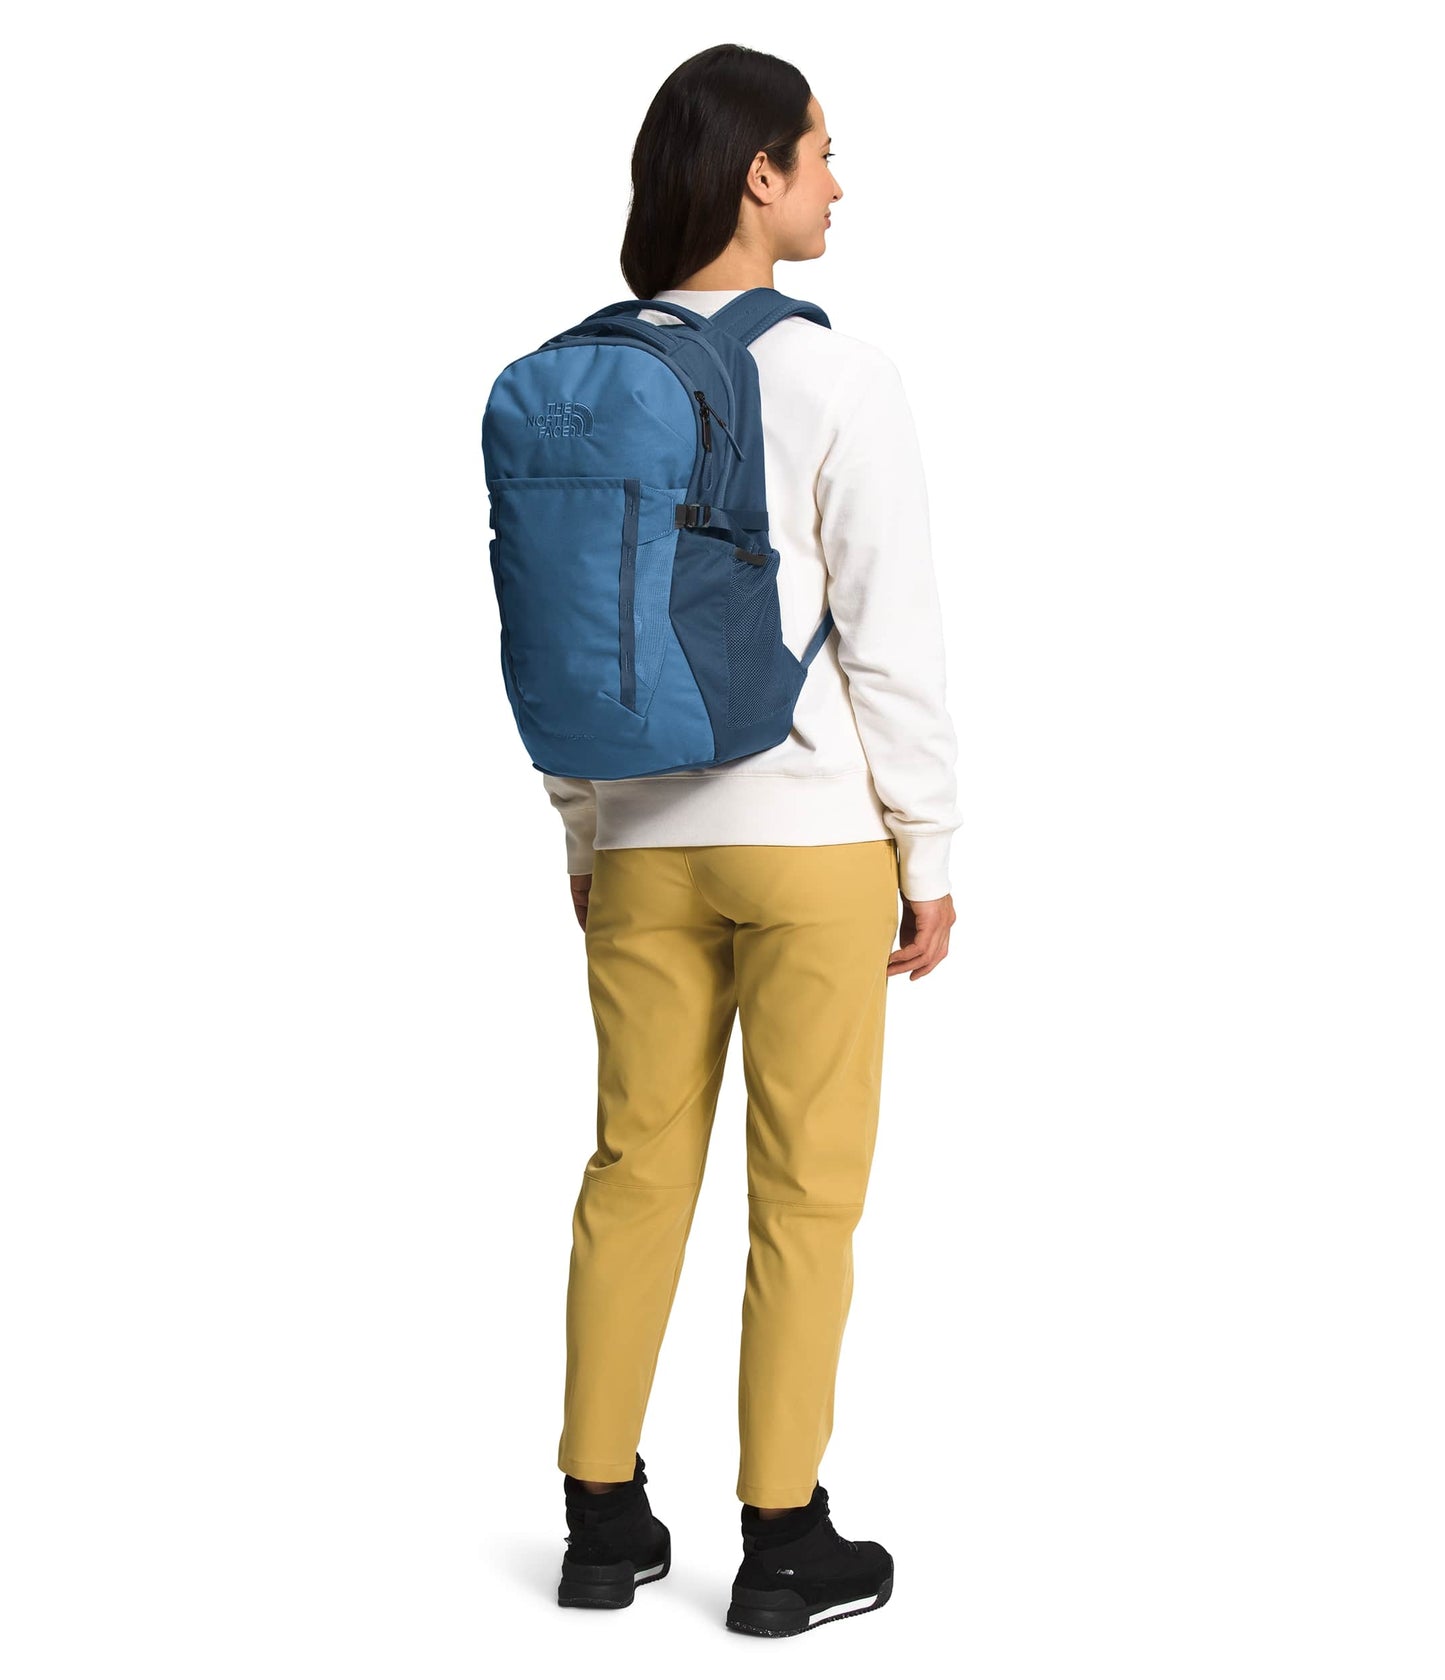 Pivoter Backpack